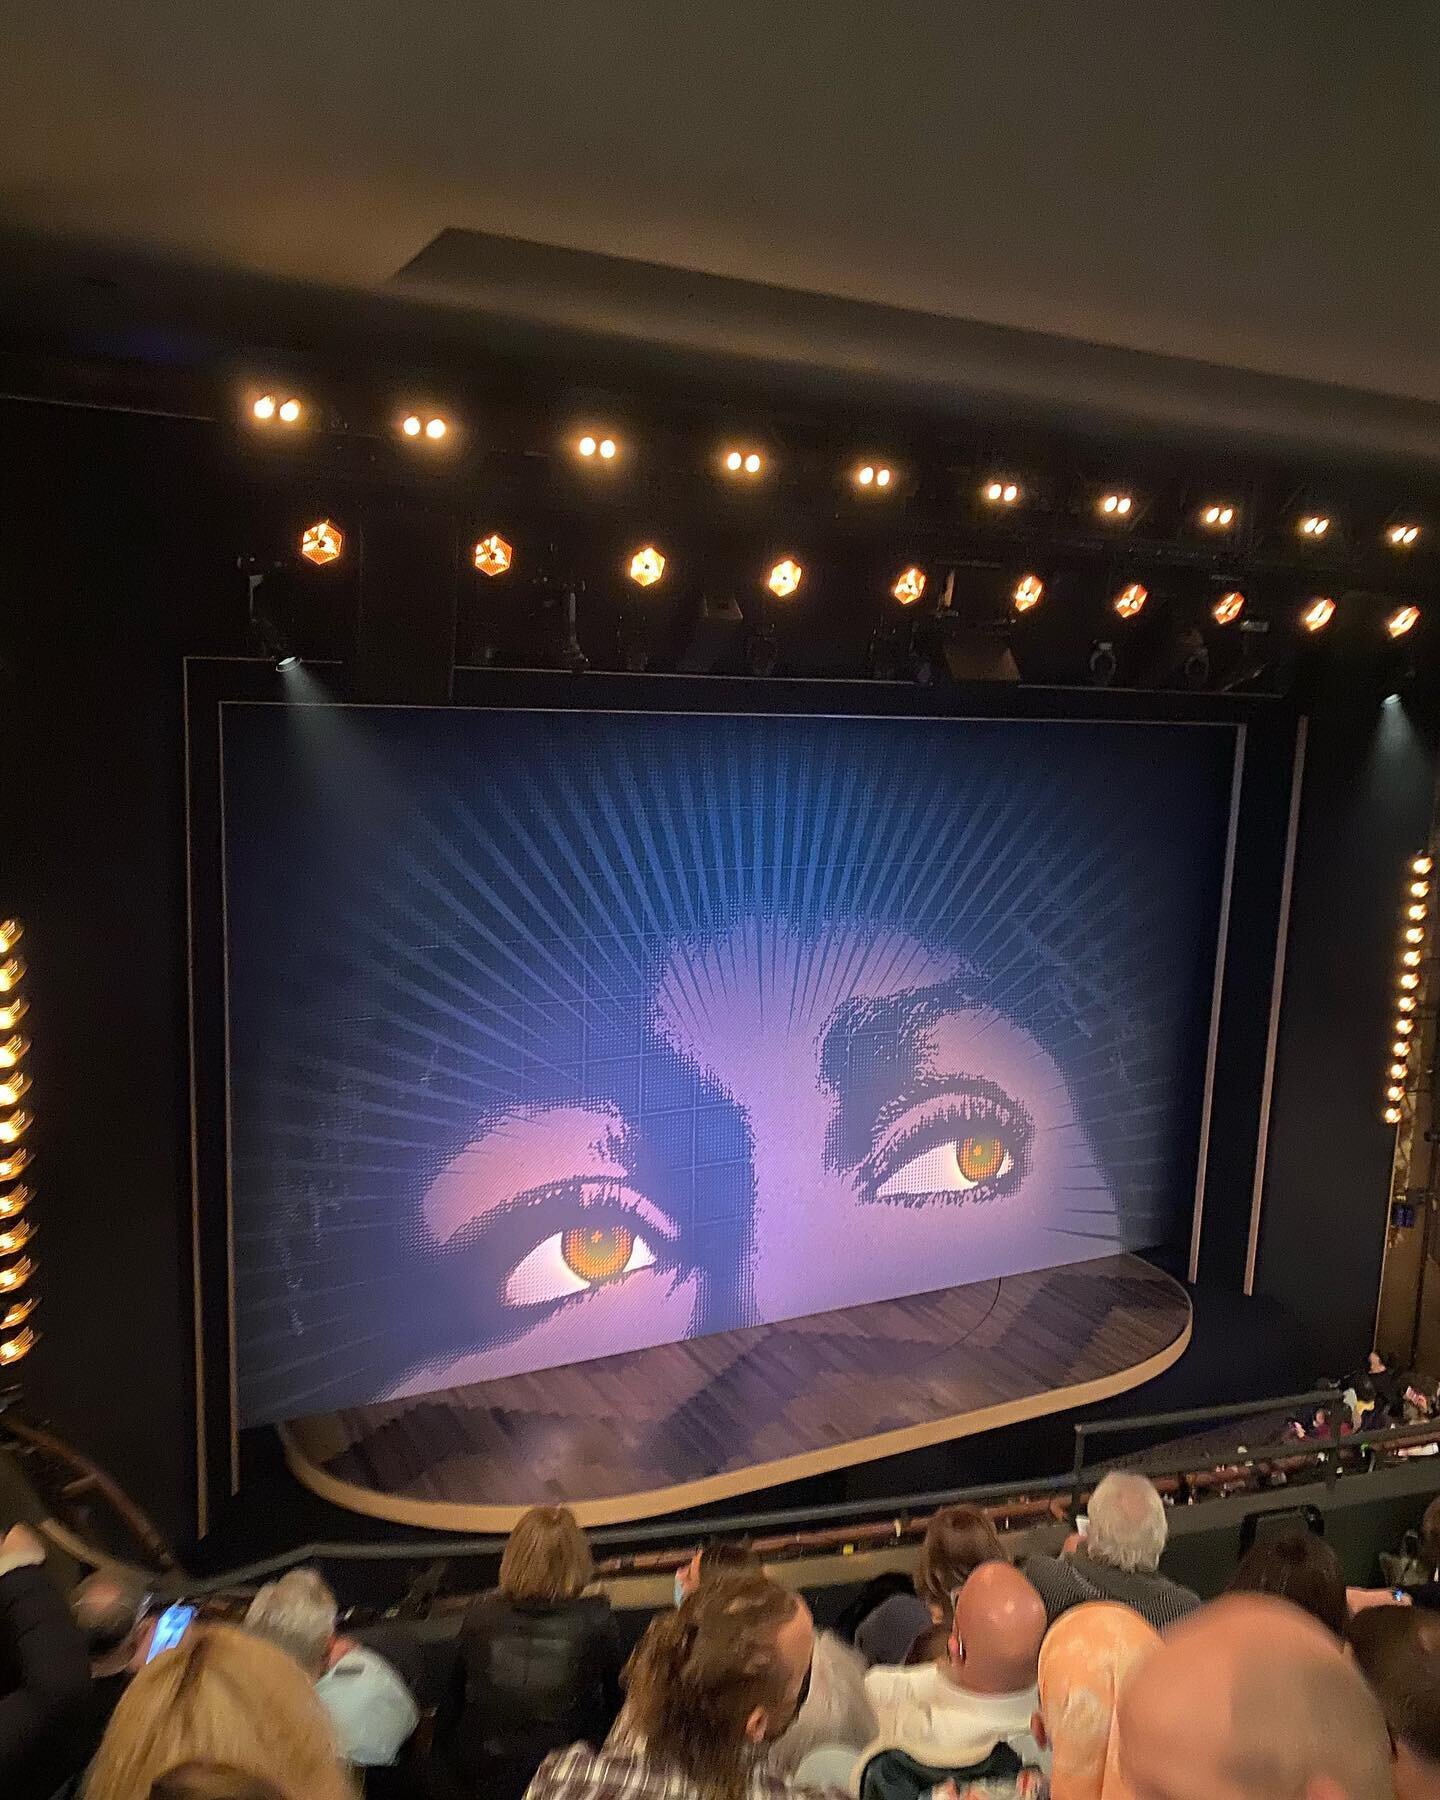 Its a week of seeing shows. Tonight, a night off to watch Tina: The Tina Turner Musical. I saw my first Broadway show in this theatre. #broadway #theatre